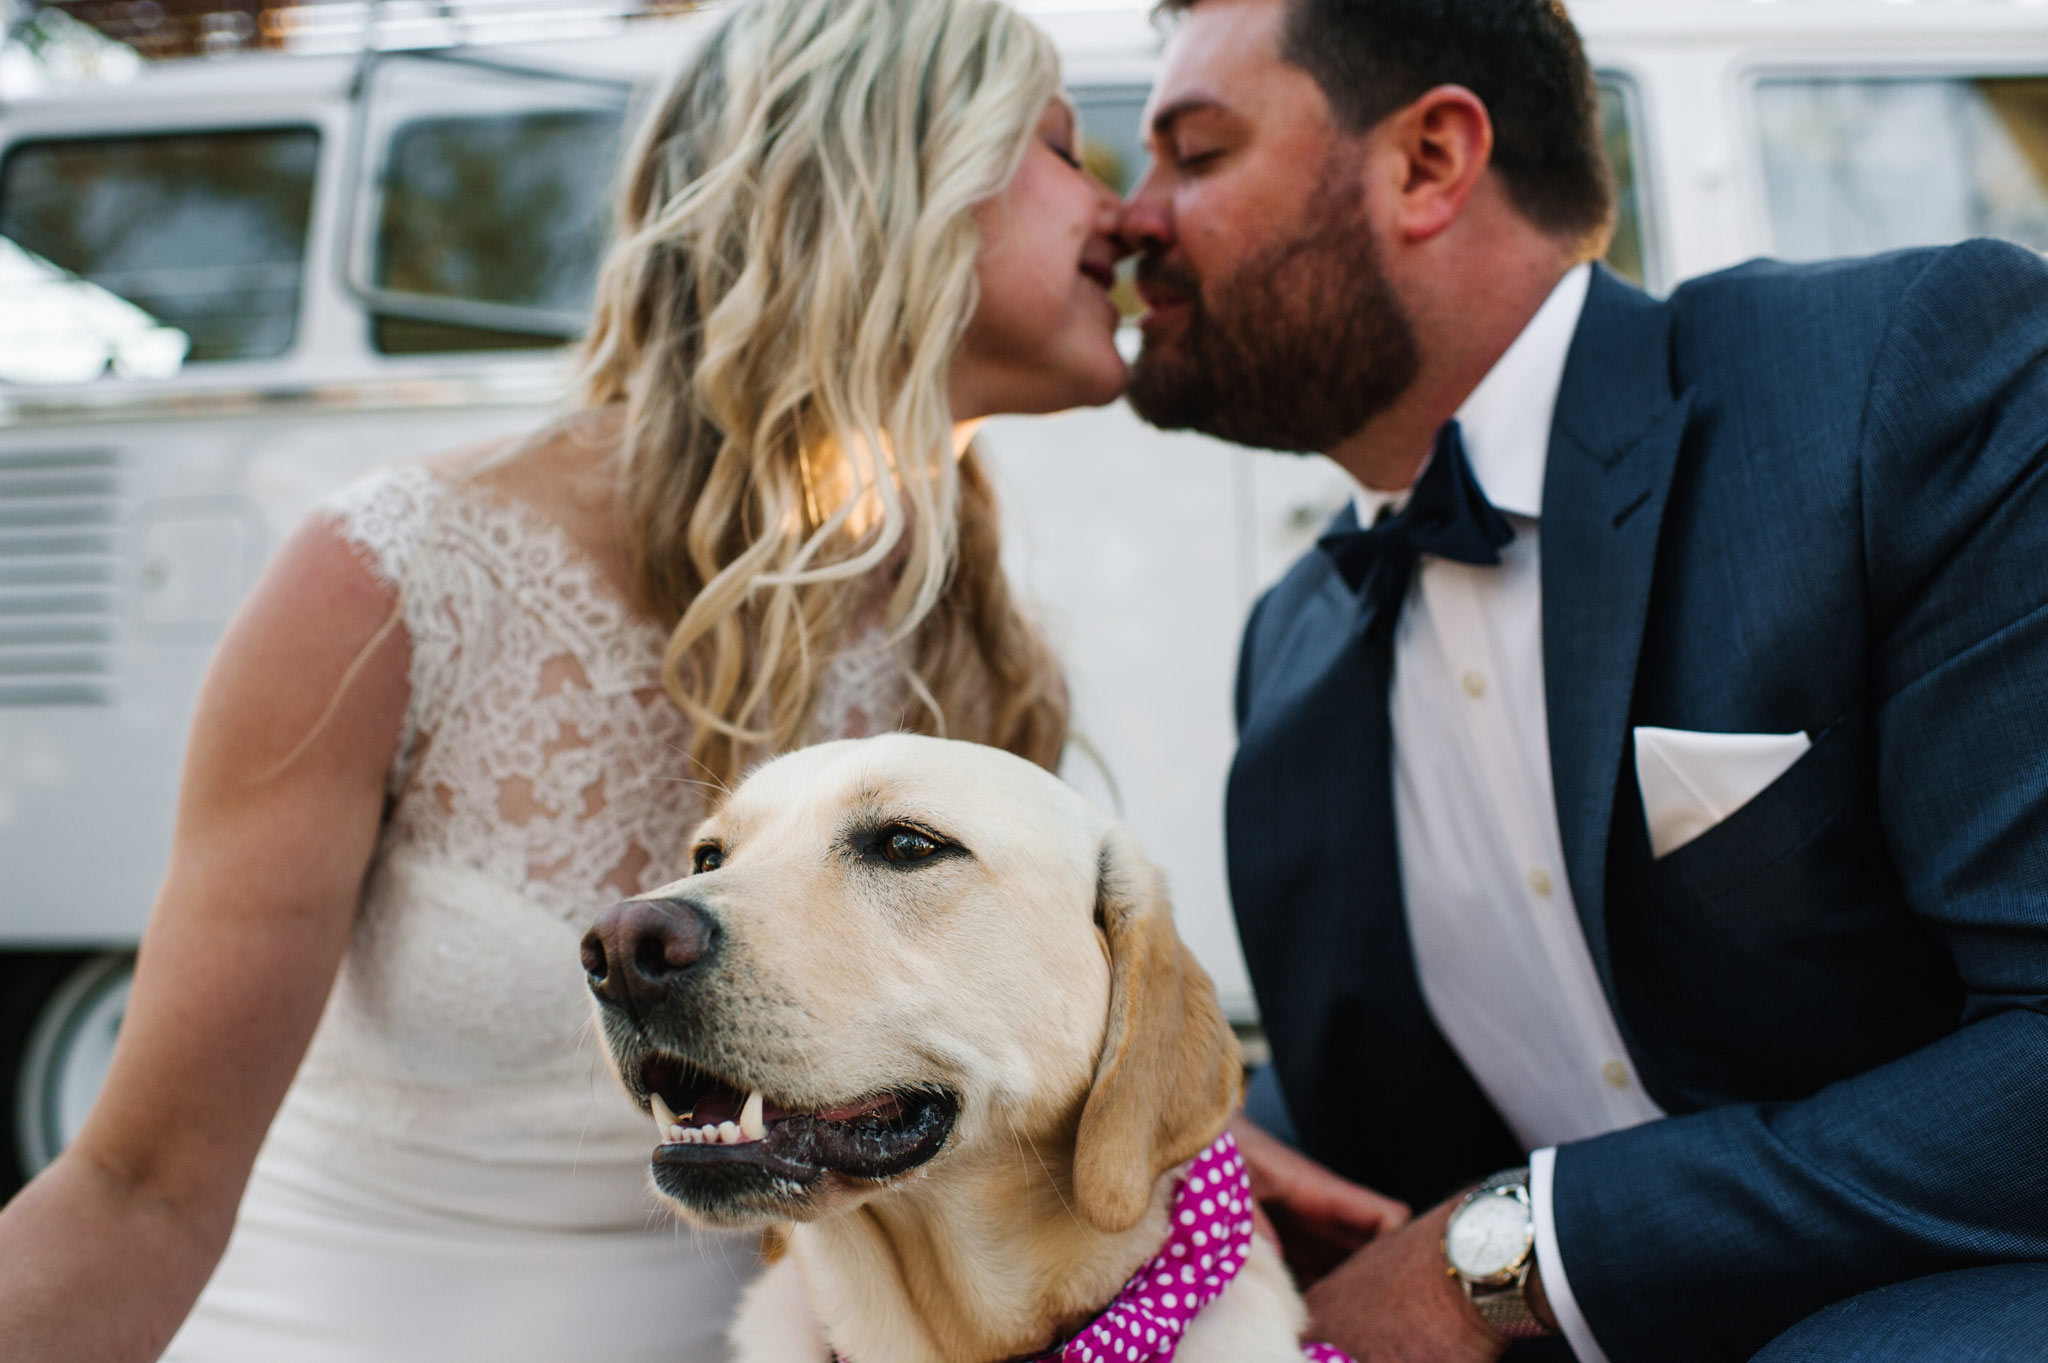 Newlyweds kissing with dog in the foreground